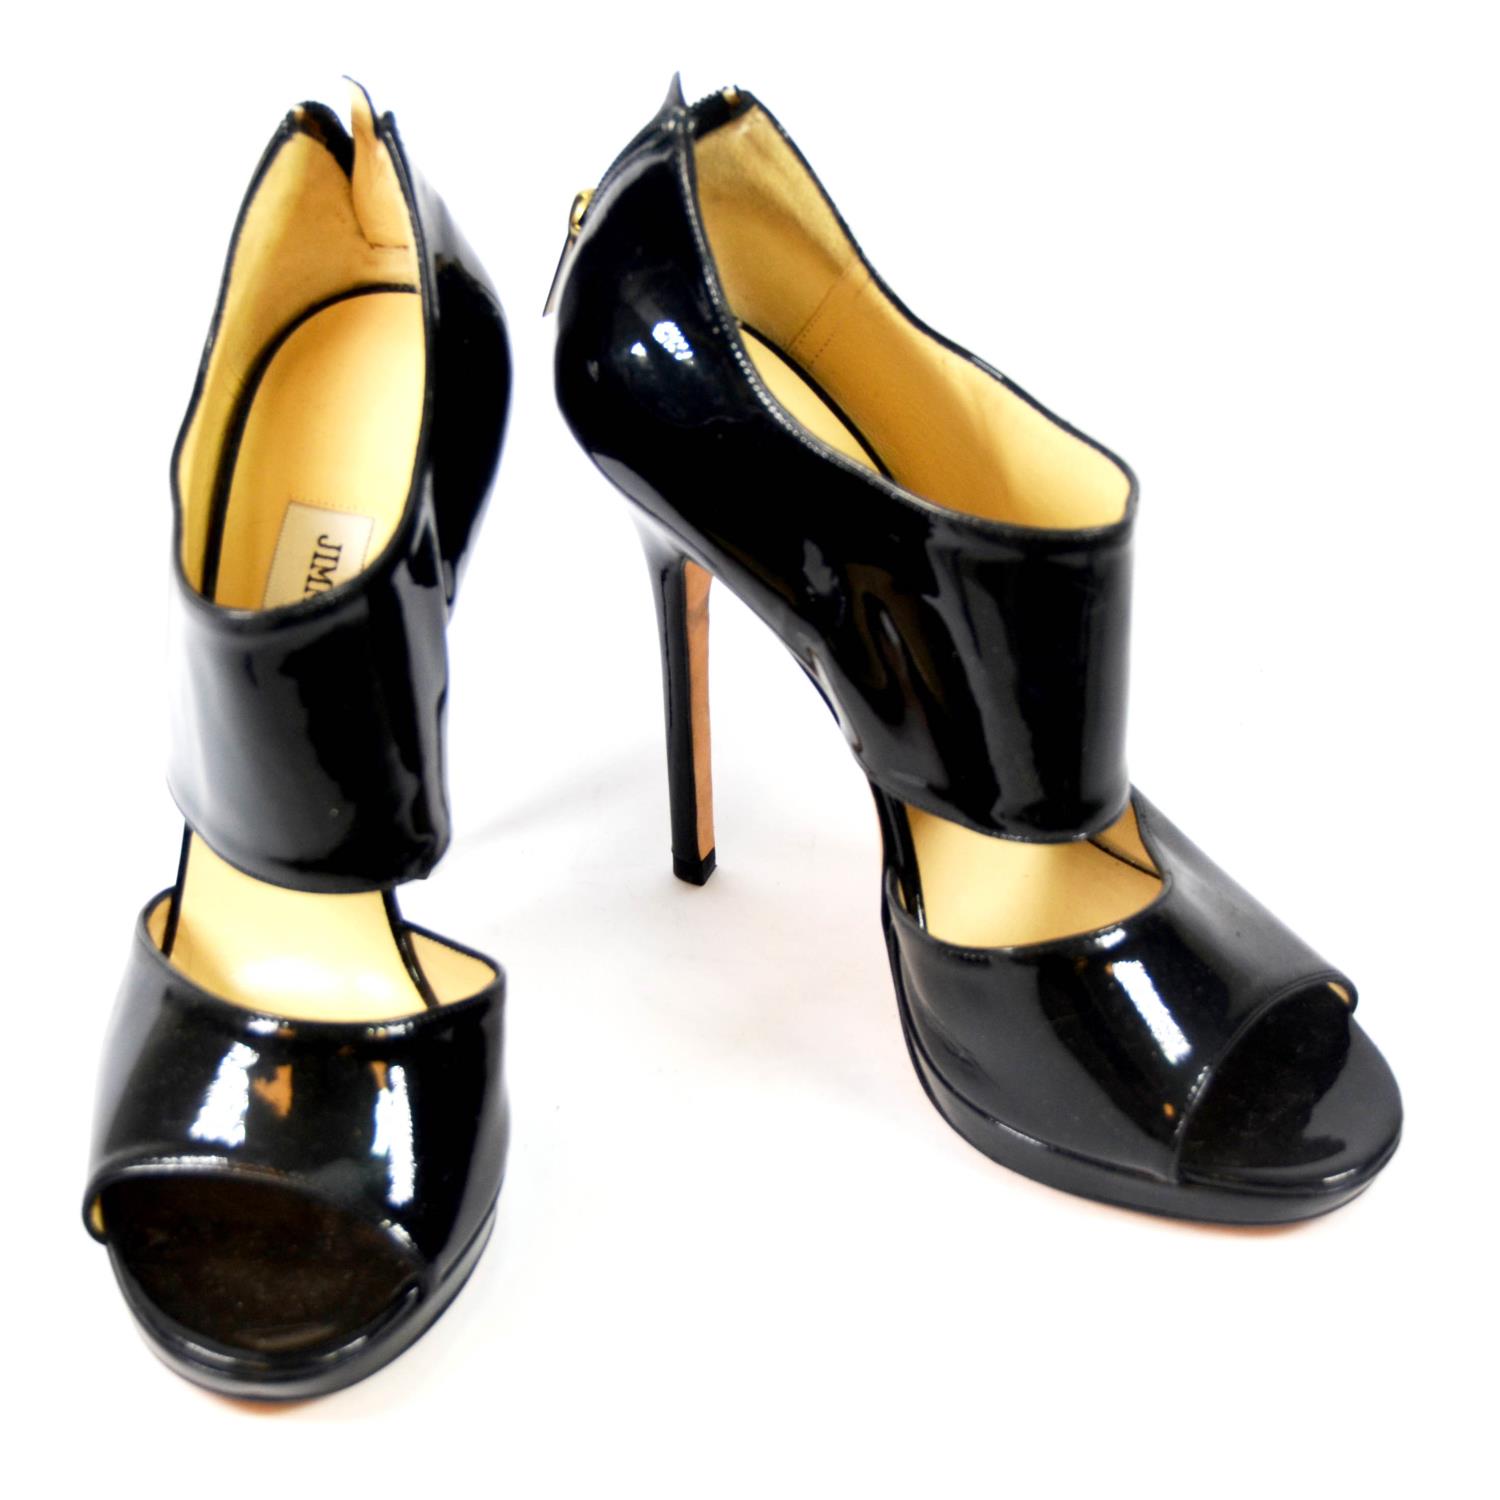 JIMMY CHOO, BLACK PATENT LEATHER SANDALS With open toe, back zip, foot and ankle support (size